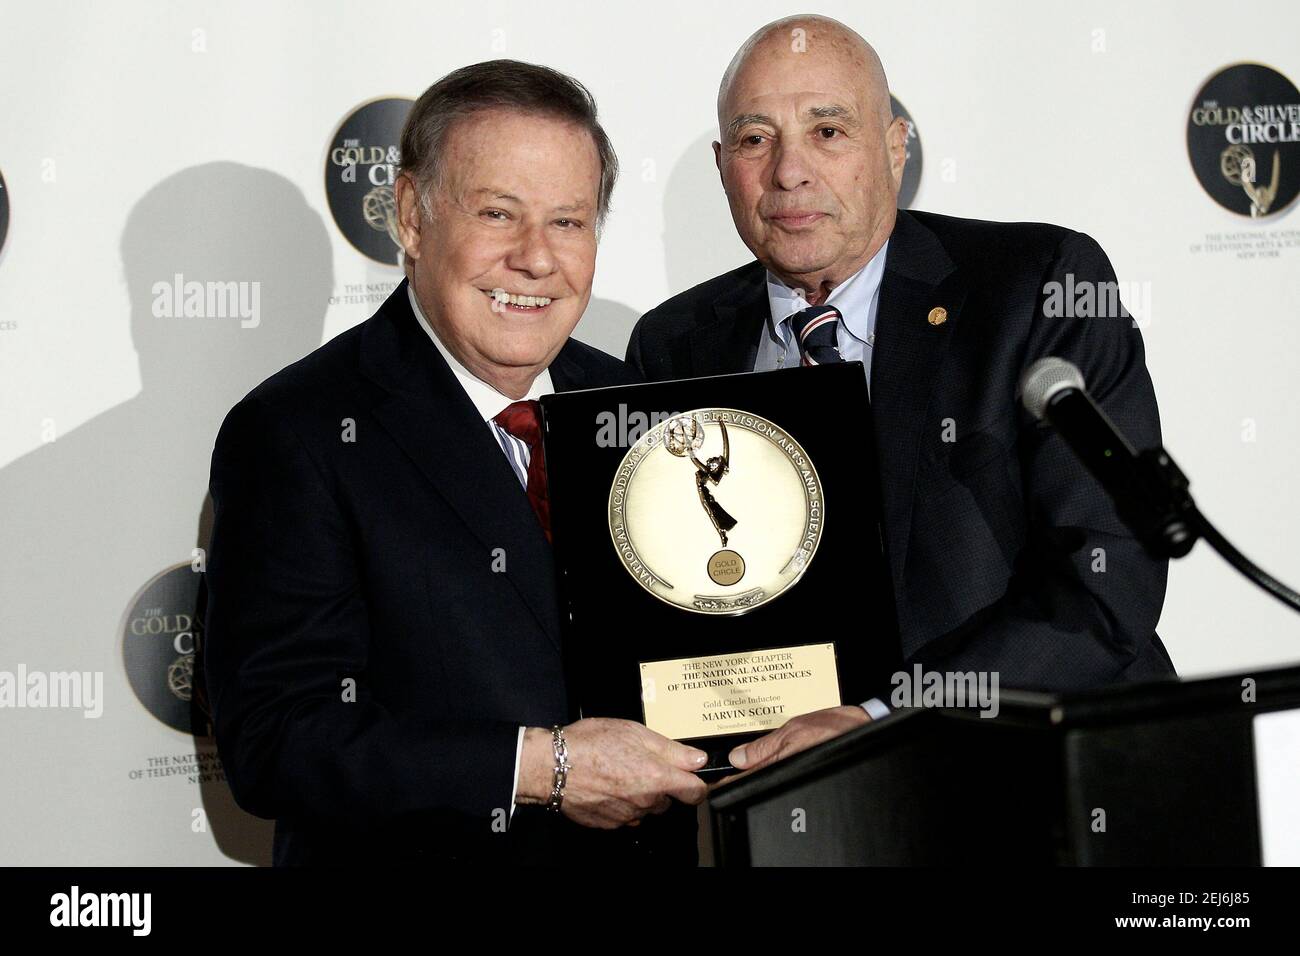 New York, NY, USA. 30 November, 2017. Gold Circle Inductee, Marvin Scott, Presenter Rich Leibner at the 2017 Gold & Silver Circle Induction Ceremony at the Lambs Club. Credit: Steve Mack/Alamy Stock Photo